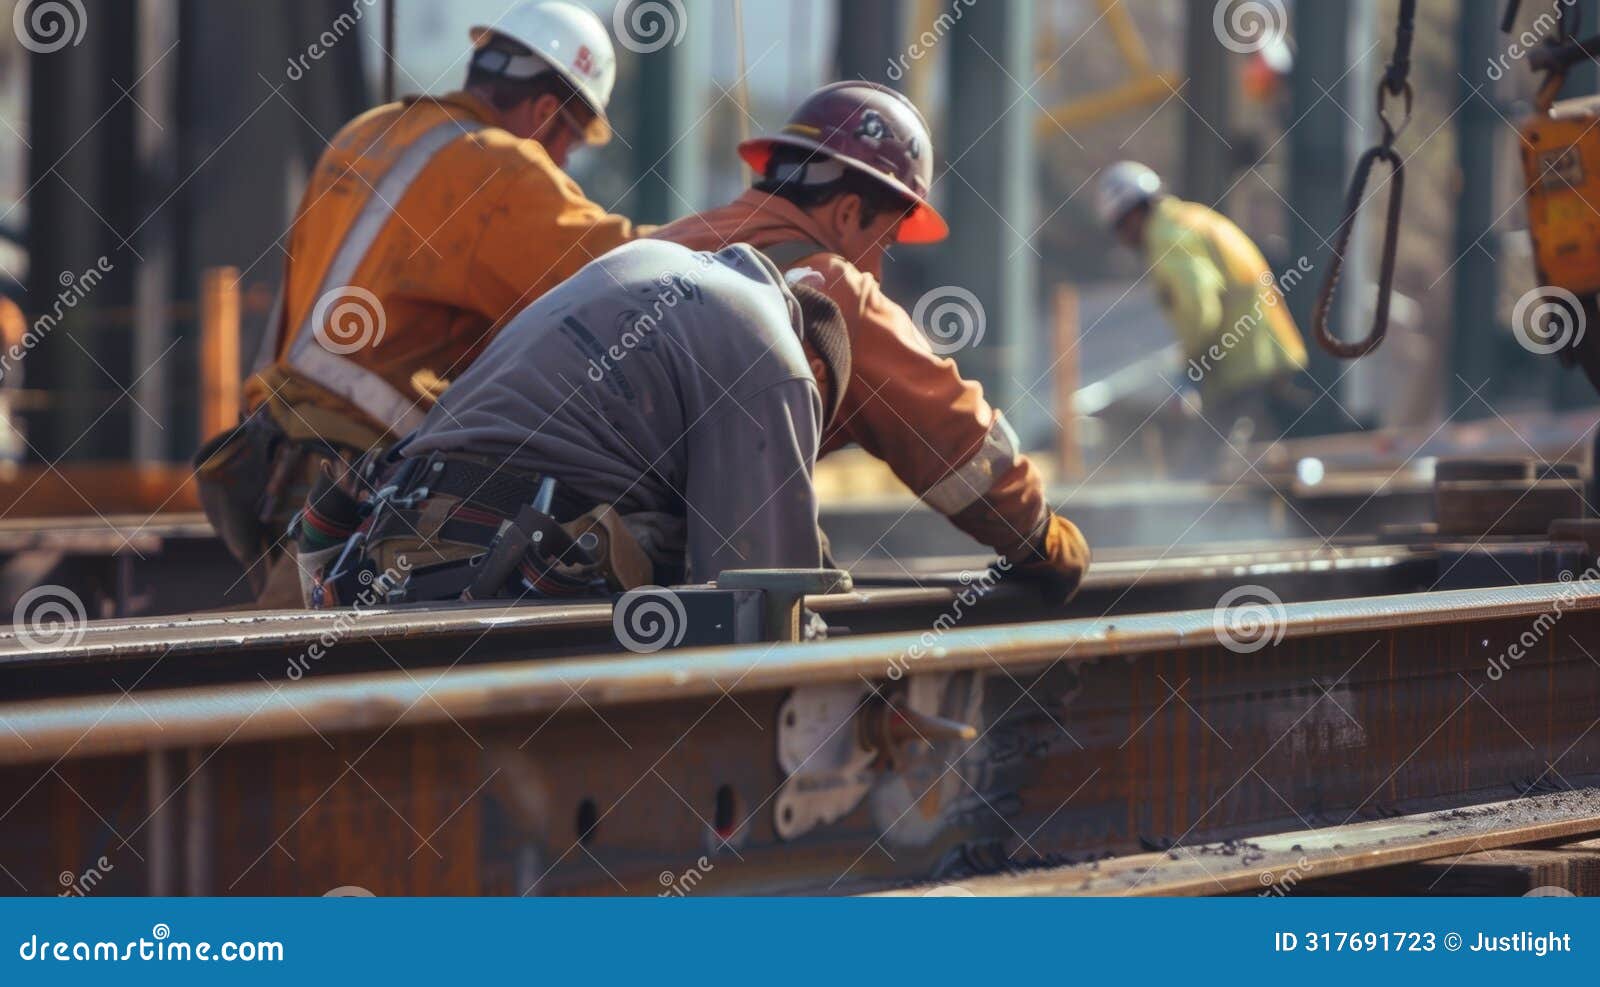 every movement of the workers is calculated and purposeful as they maneuver the steel pieces into place creating a